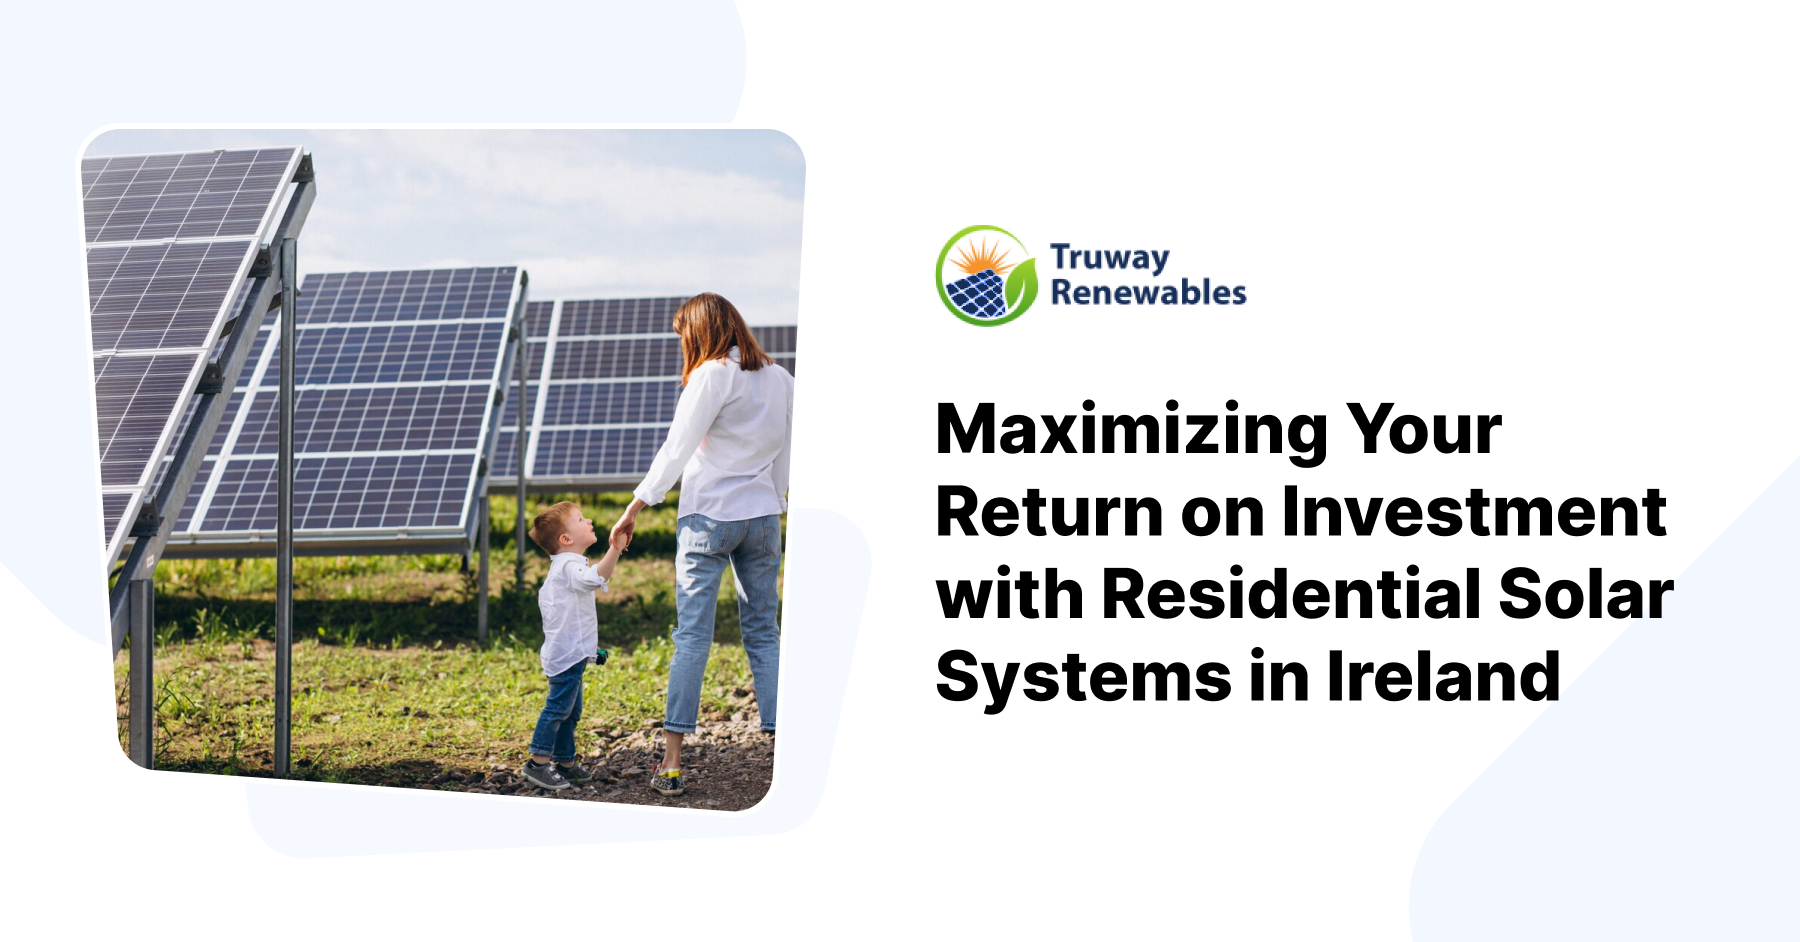 Maximizing Your Return on Investment with Residential Solar Systems in Ireland